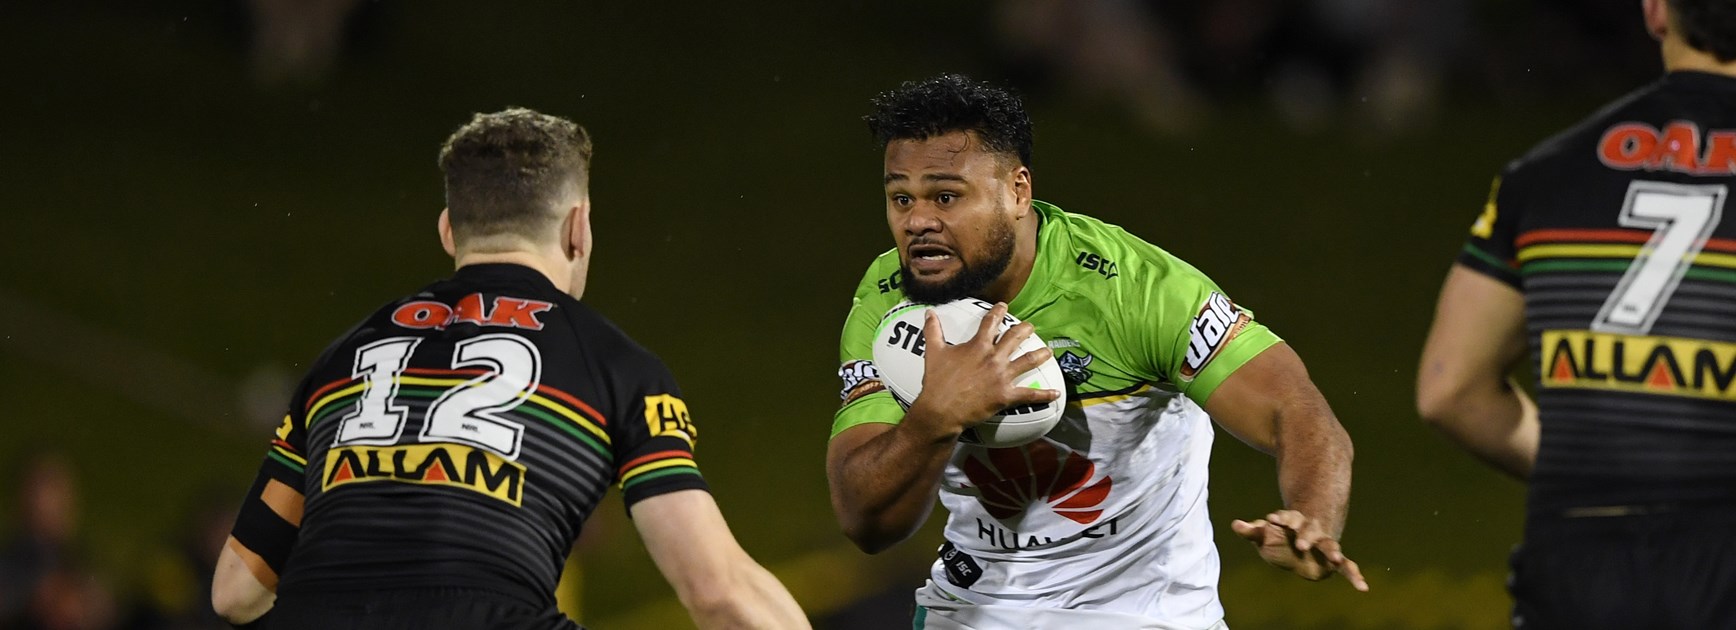 NRL Match Report: Panthers hold off late Raiders fightback